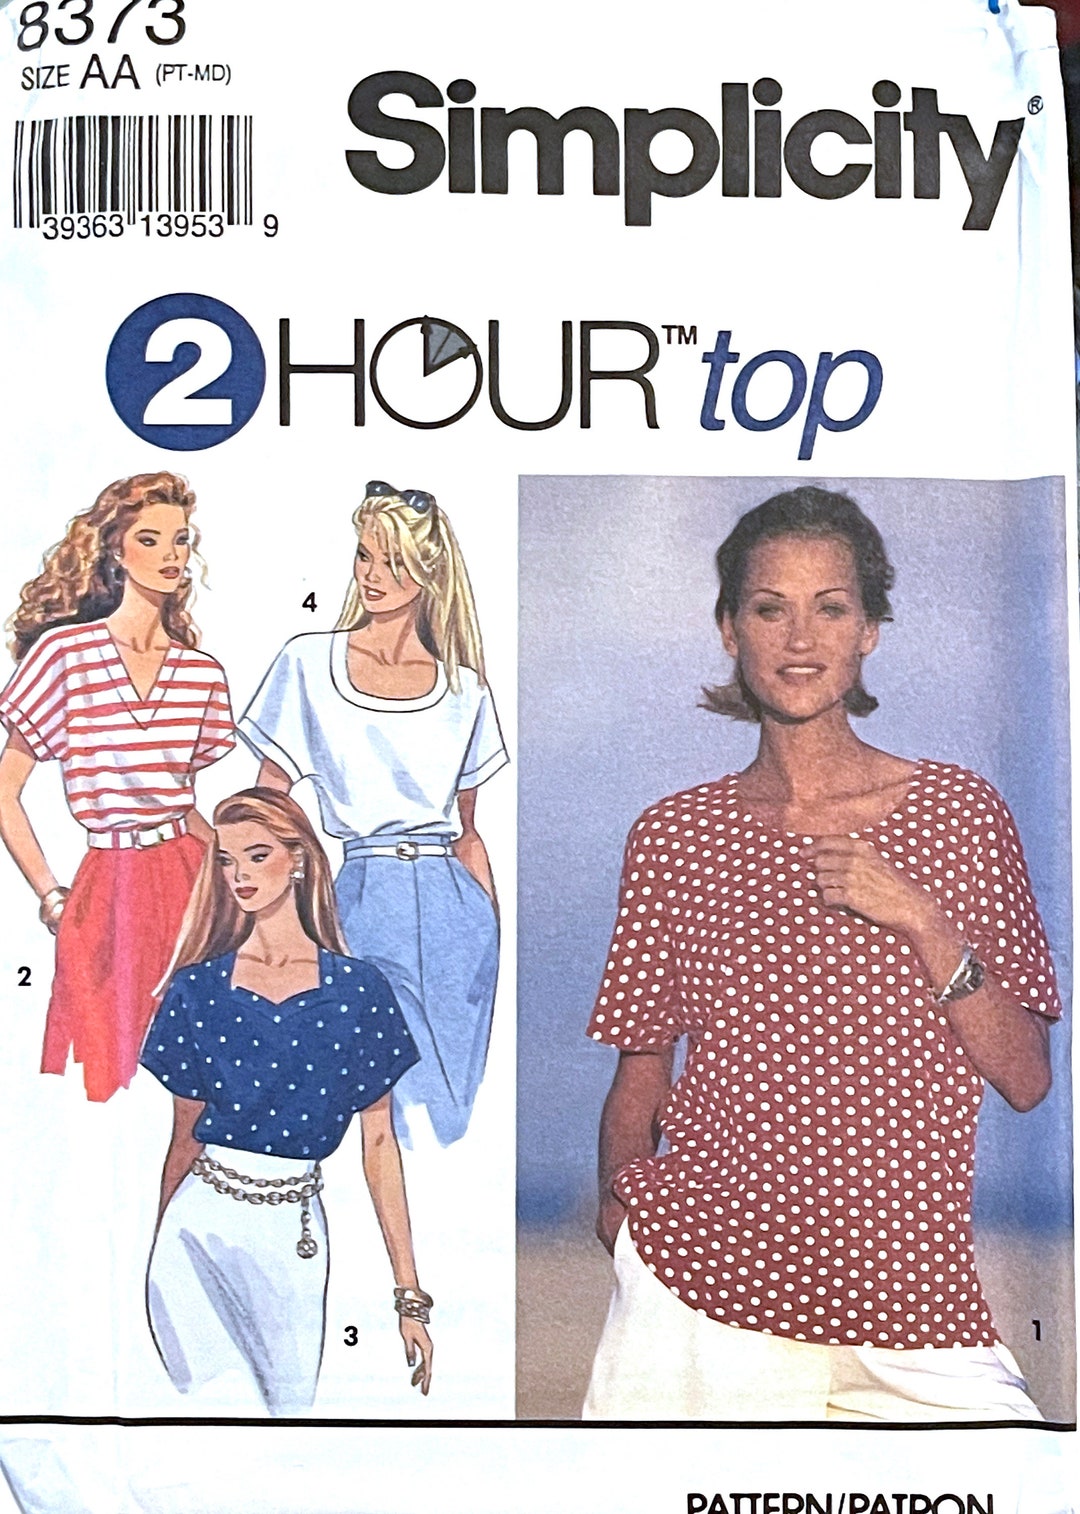 Simplicity 8373 UNCUT Pattern for Misses 2-hour Summer Tops - Etsy